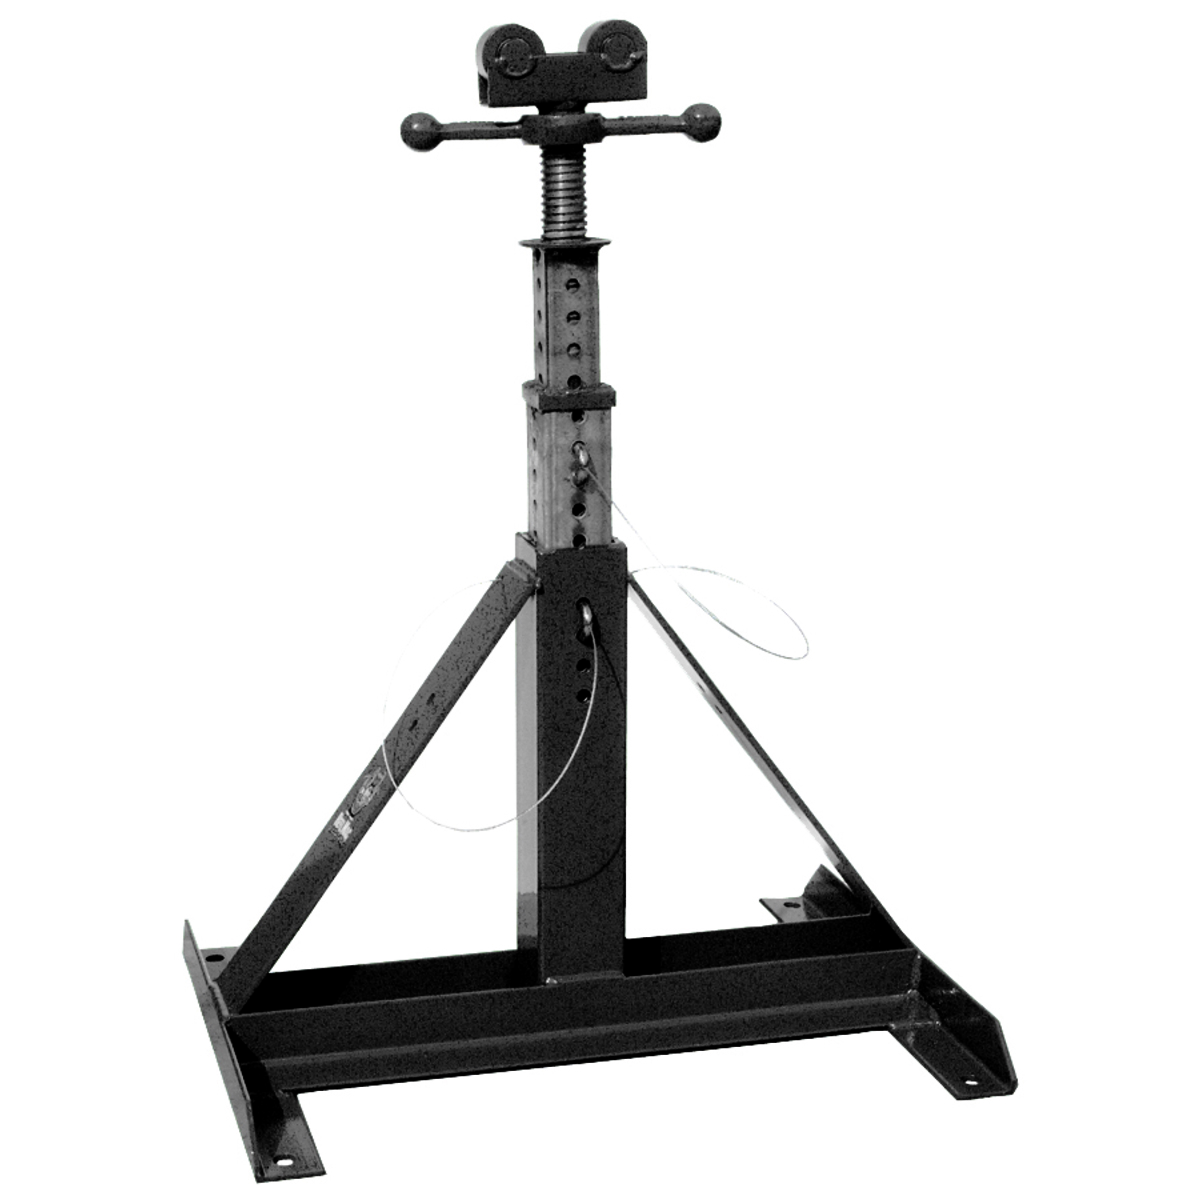 Reel Stand, 25 x 25 x 25 Inch Size